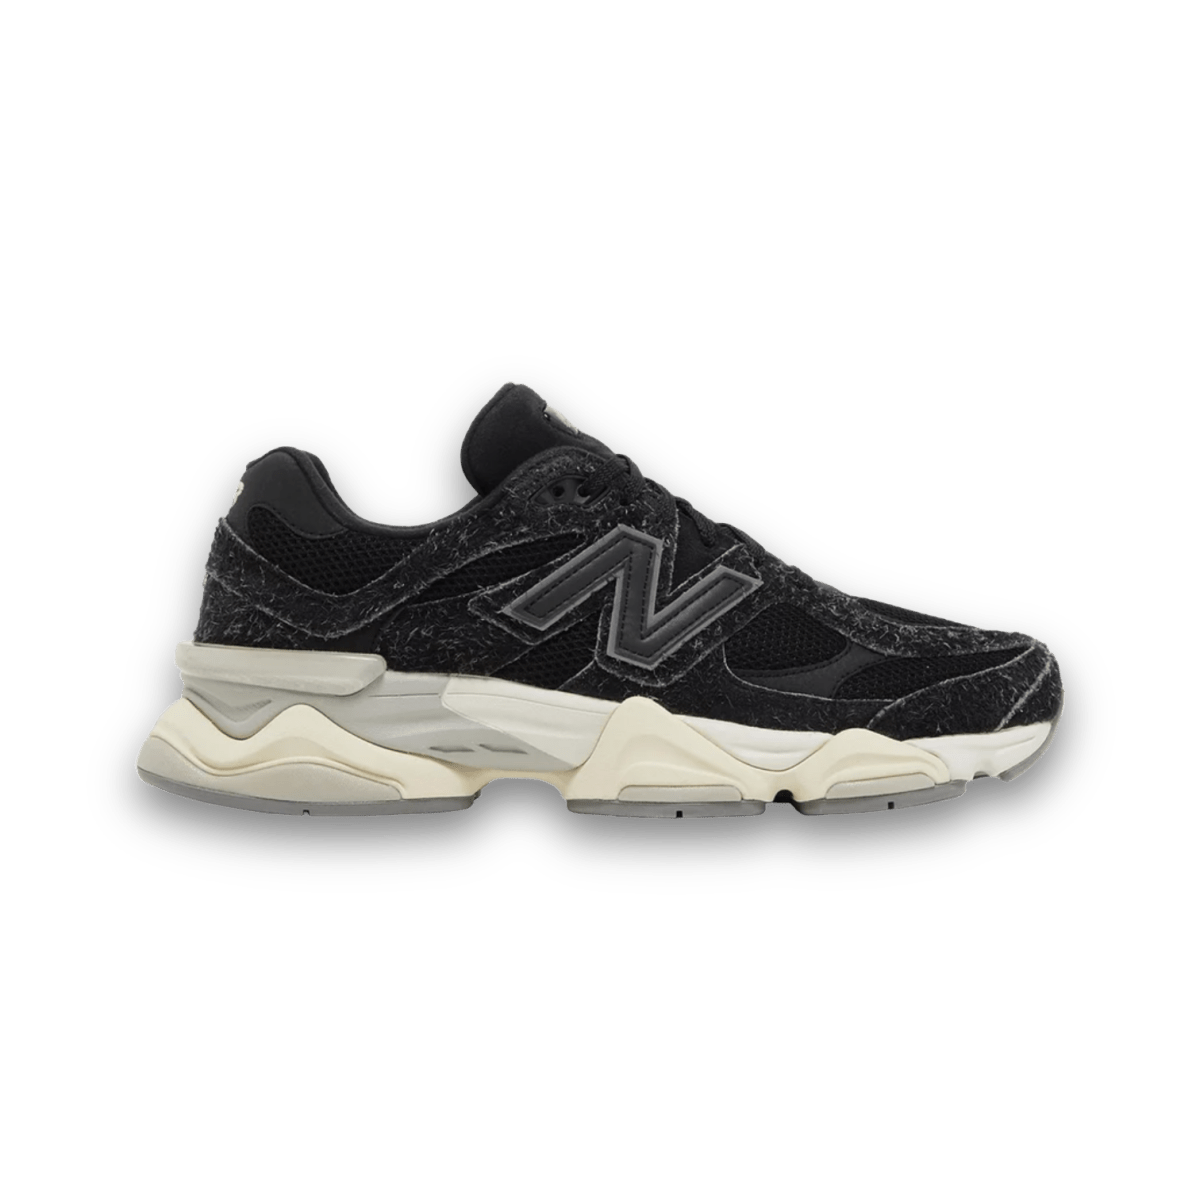 New Balance 9060 'Suede Pack - Black' - Low Sneaker - New Balance - Jawns on Fire - sneakers